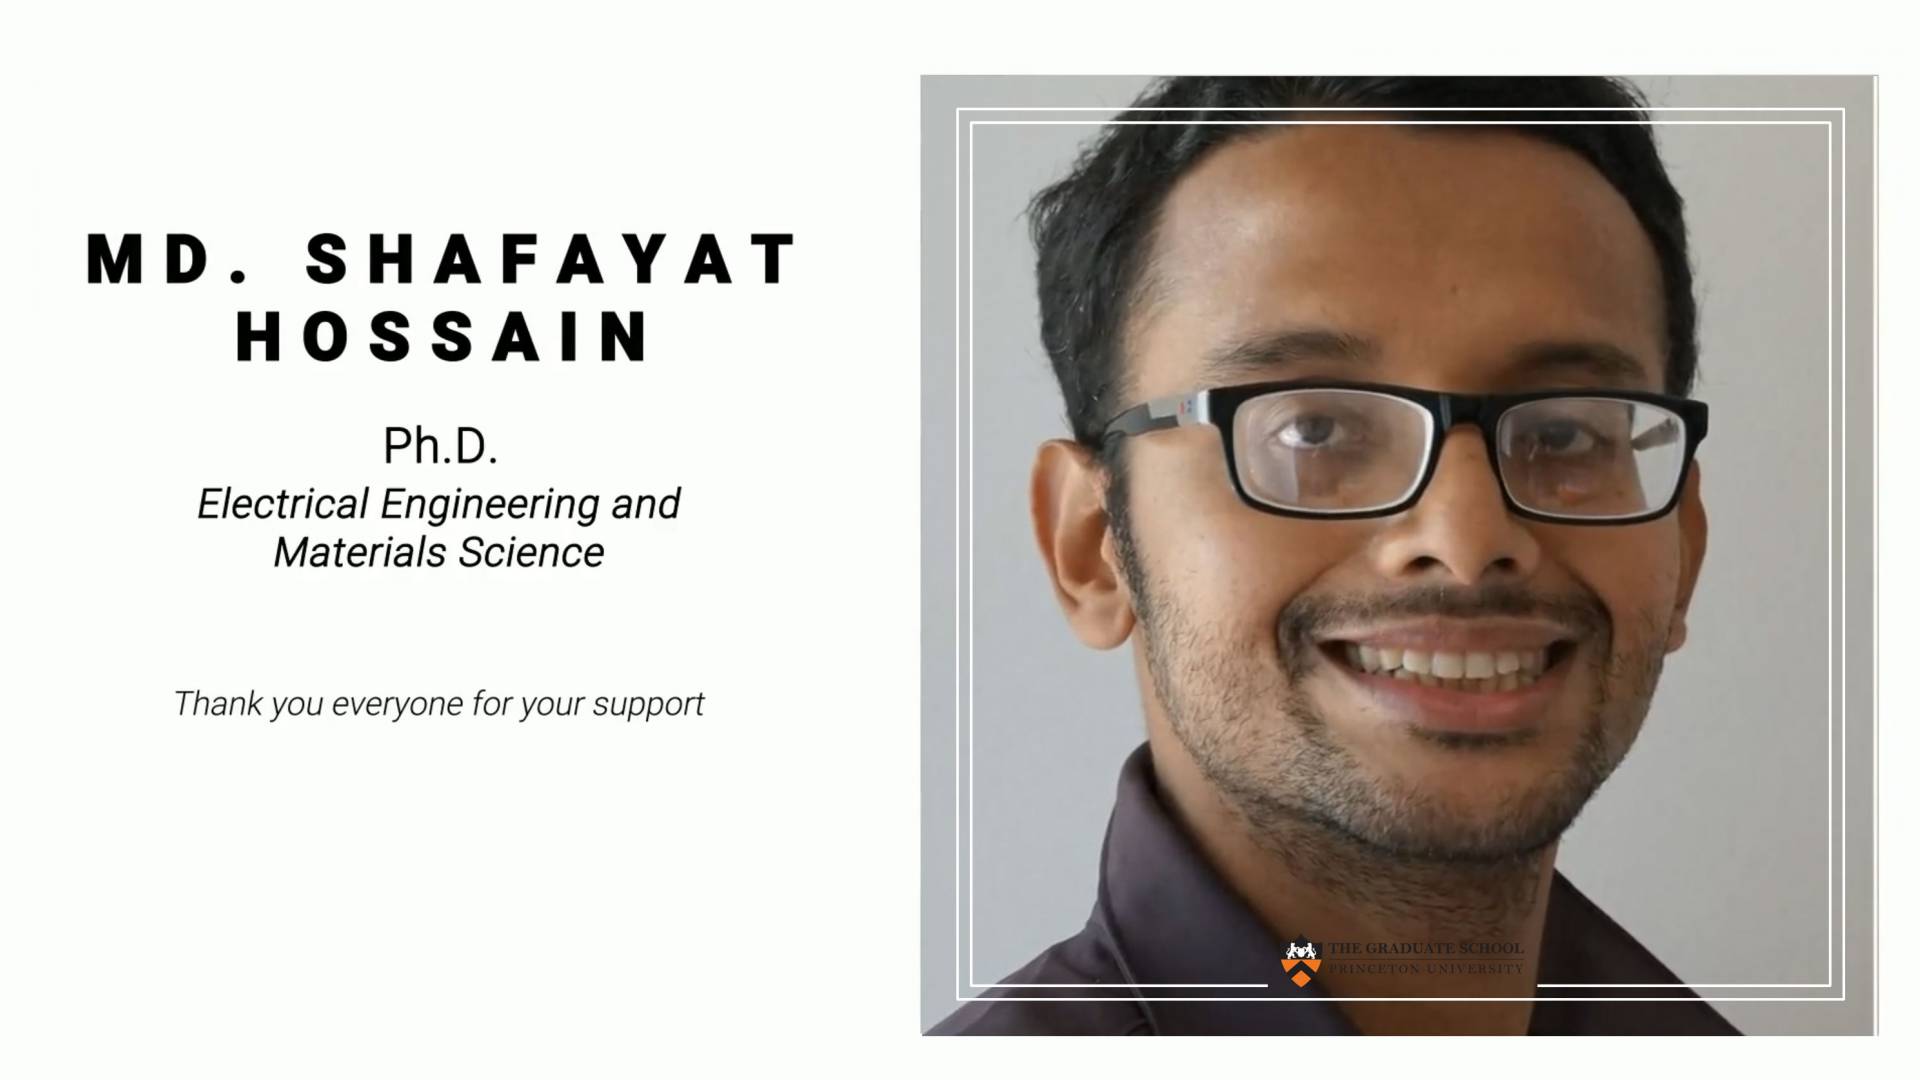 MD Shafayat Hossain, PhD, Electrical Engineering and Materials Science. Thank you everyone for your support